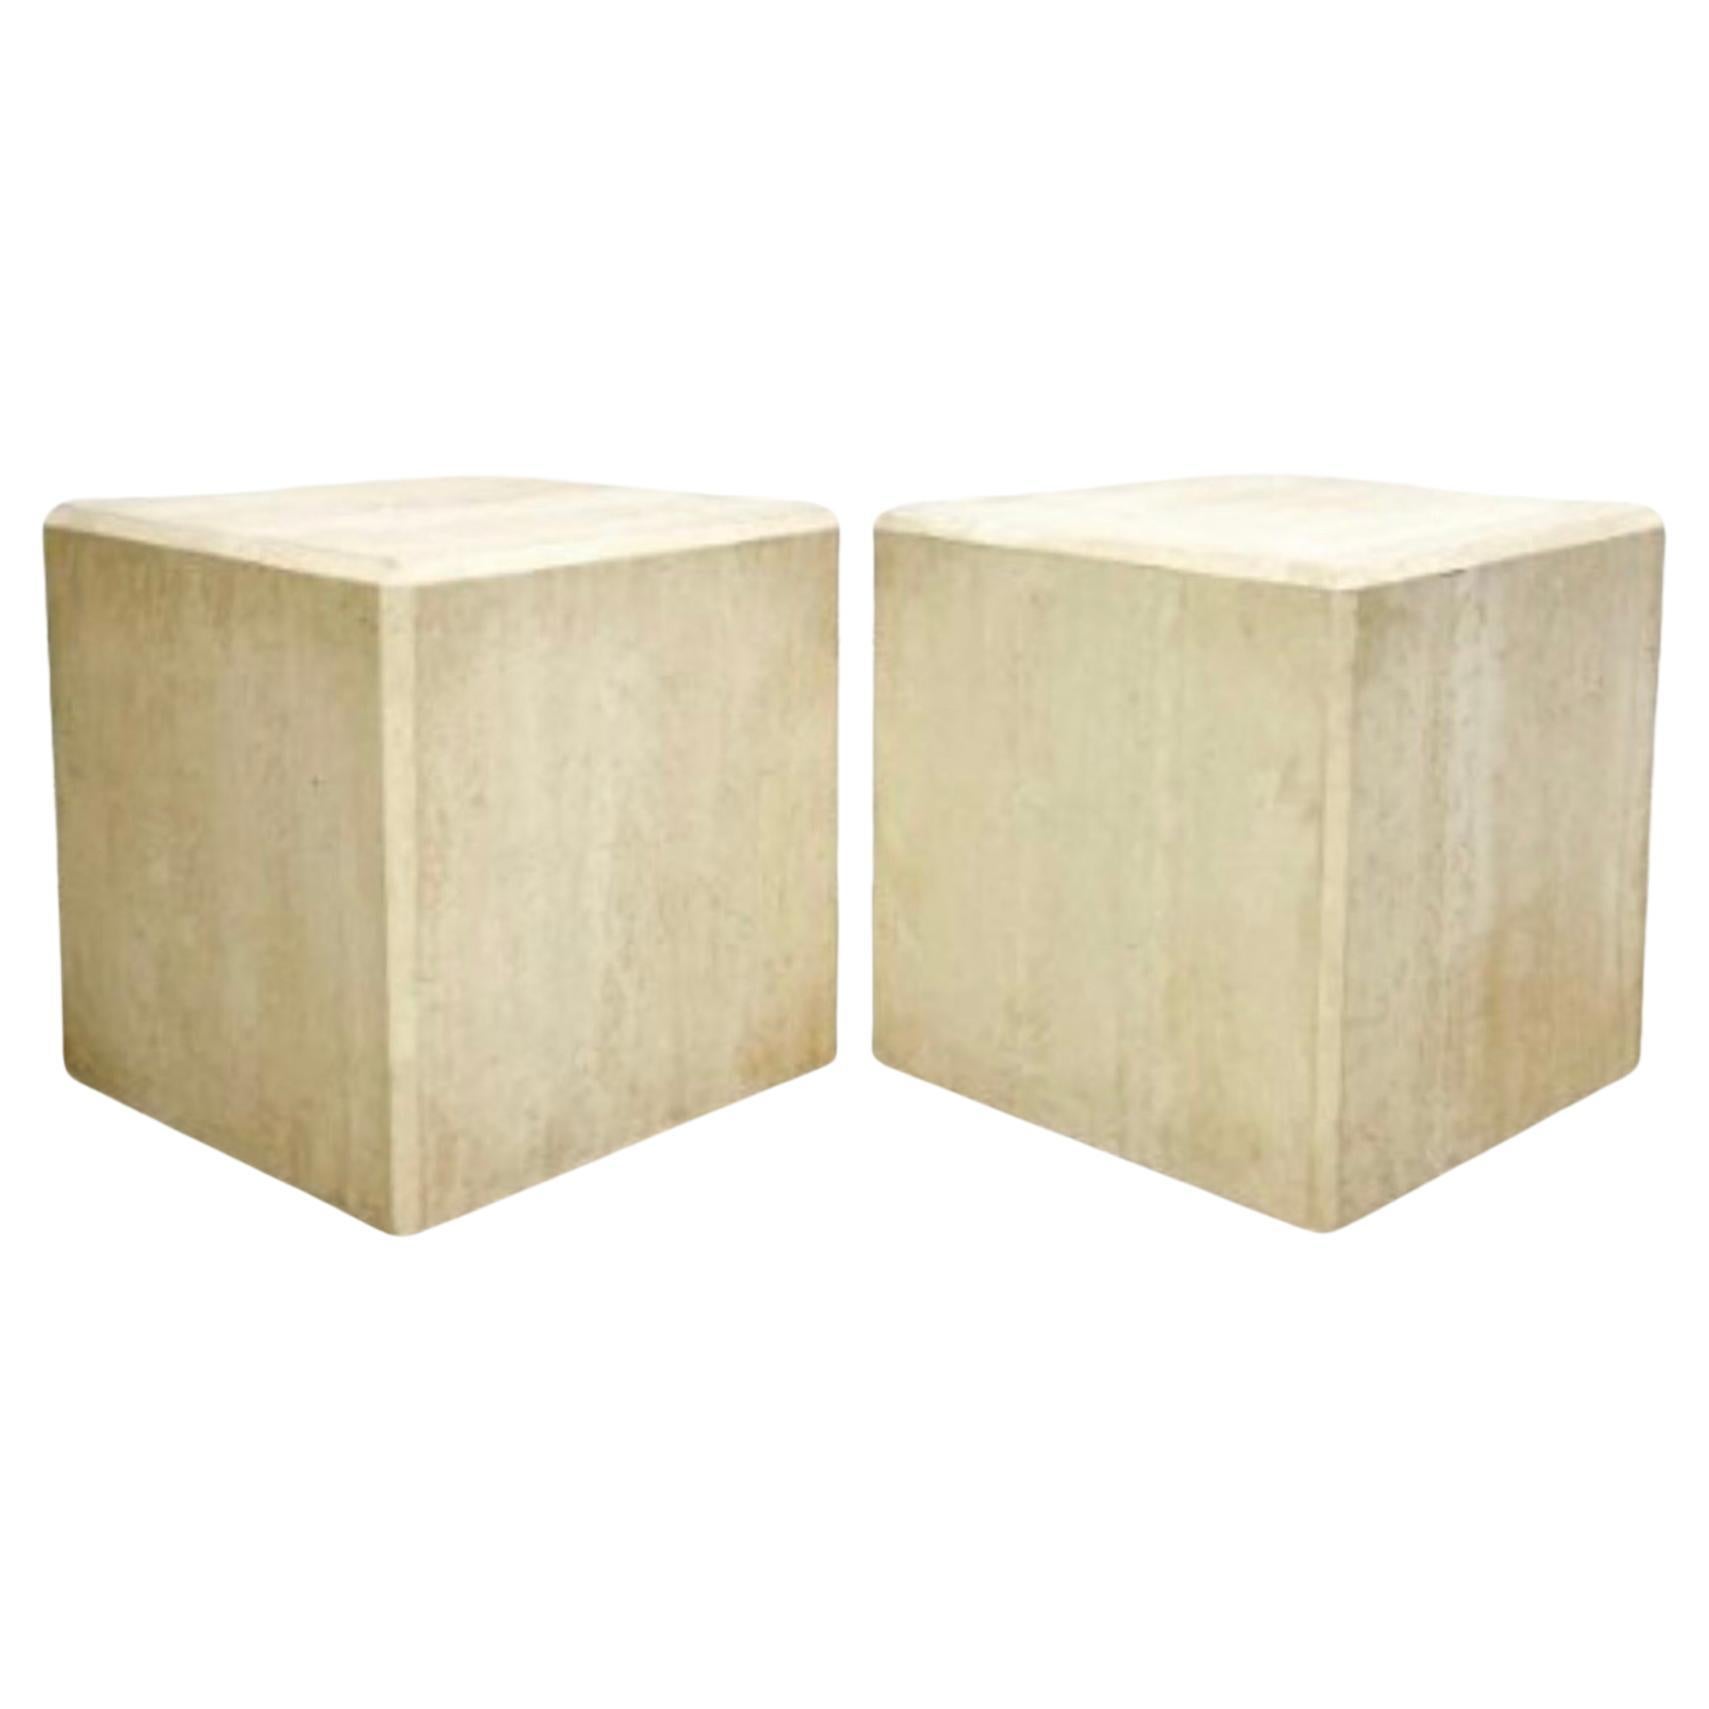 Large Scale Organic Modern Travertine Stone Side Or End Tables / Pedestals -Pair en vente